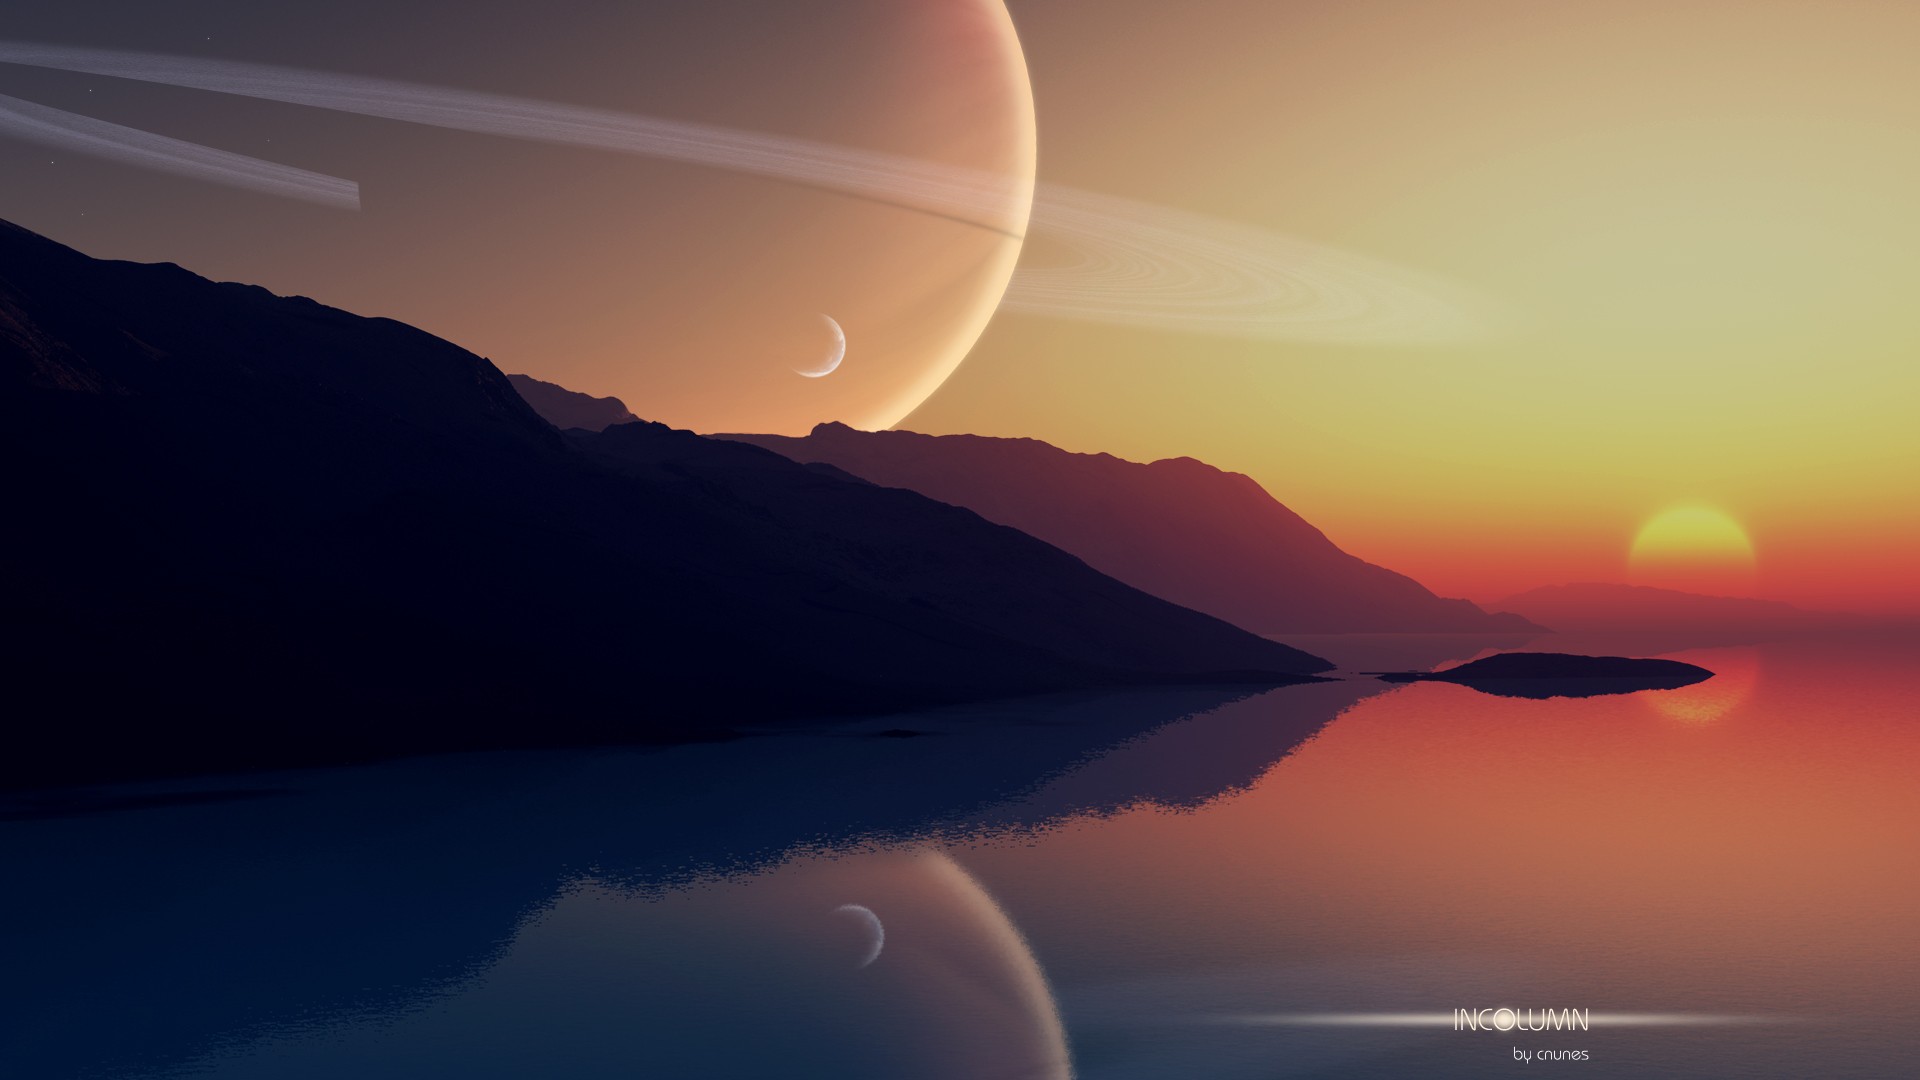 General 1920x1080 space art digital art space reflection sunlight planet planetary rings nature